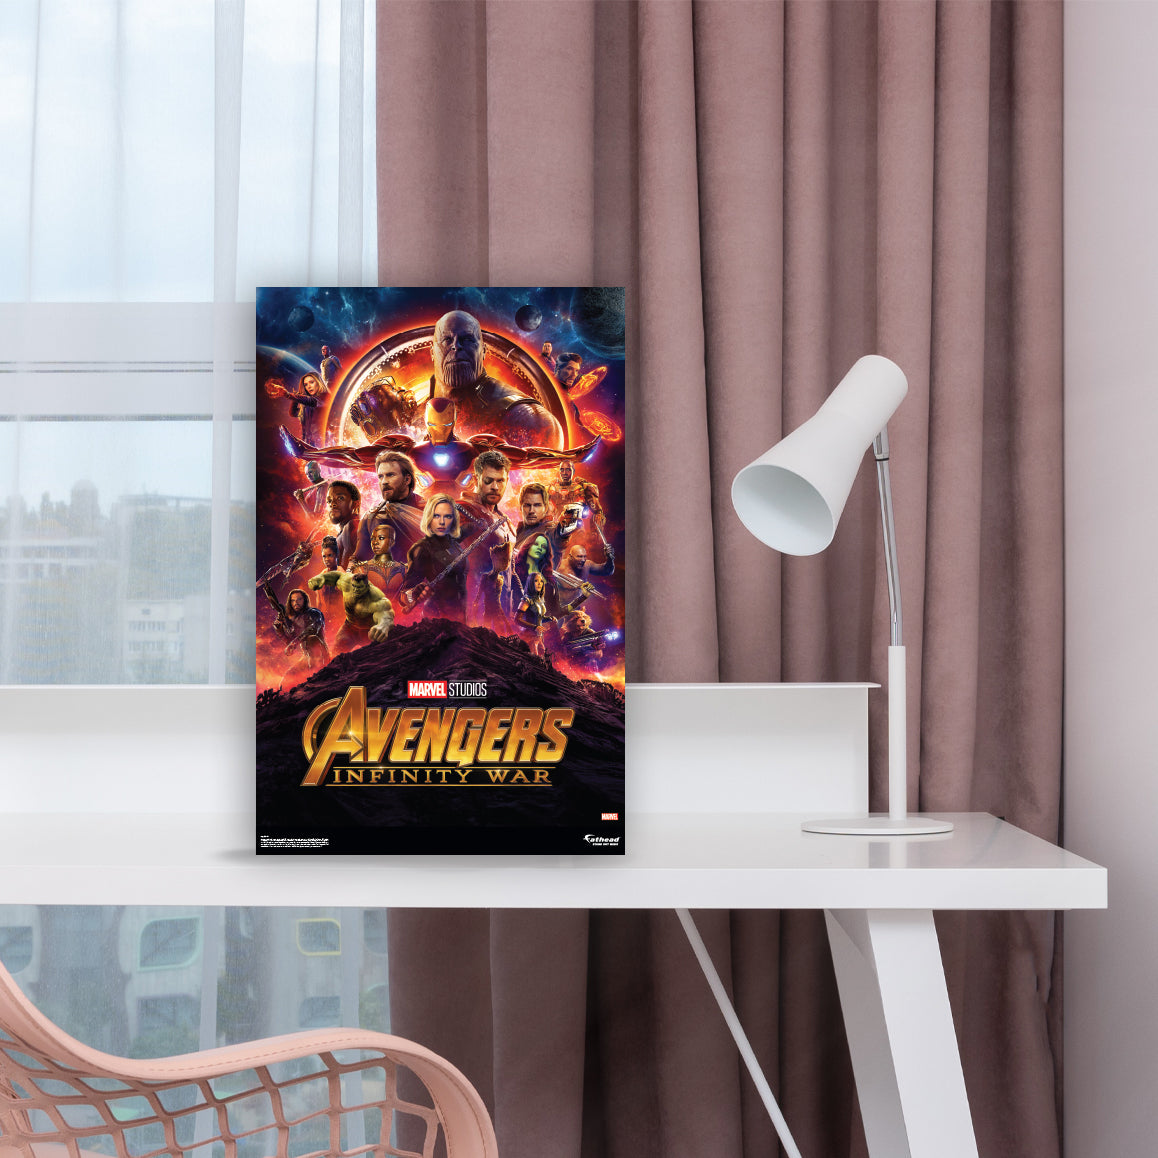 Avengers: Avengers Infinity War Poster  Mini   Cardstock Cutout  - Officially Licensed Marvel    Stand Out